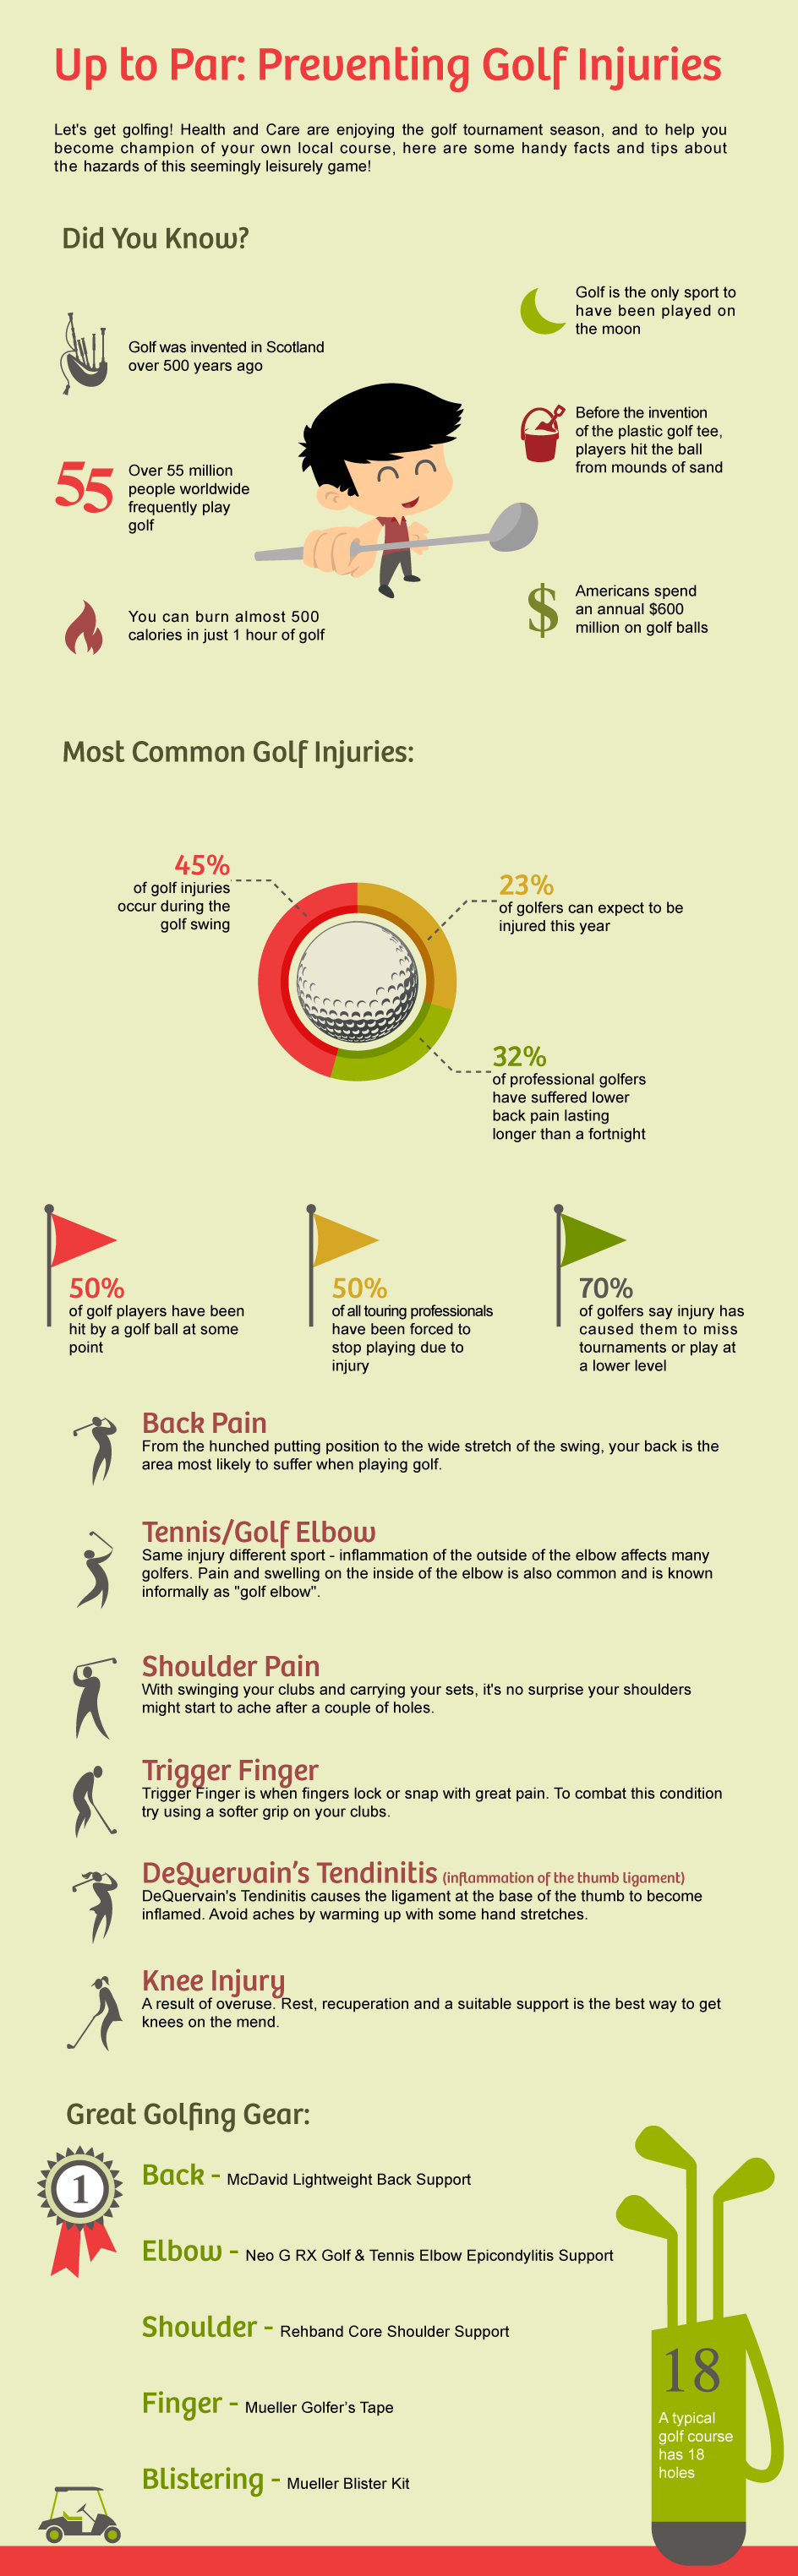 Find Out More About How to Avoid Golf Injuries